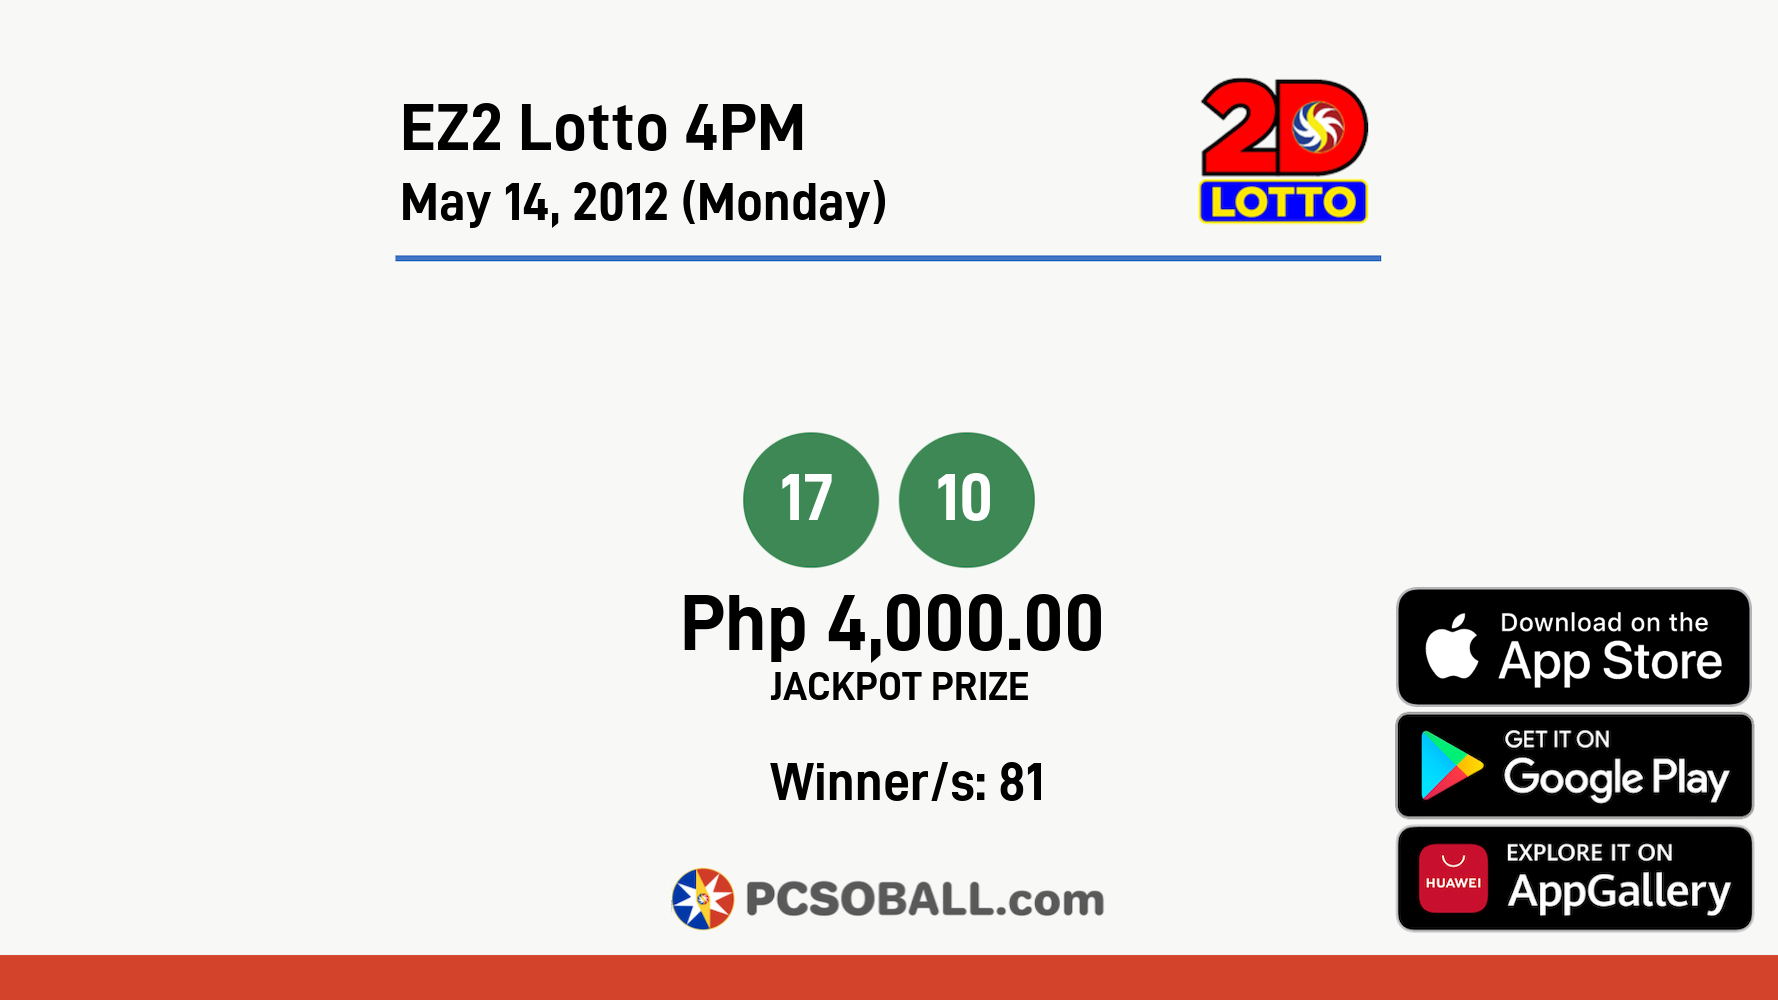 EZ2 Lotto 4PM May 14, 2012 (Monday) Result